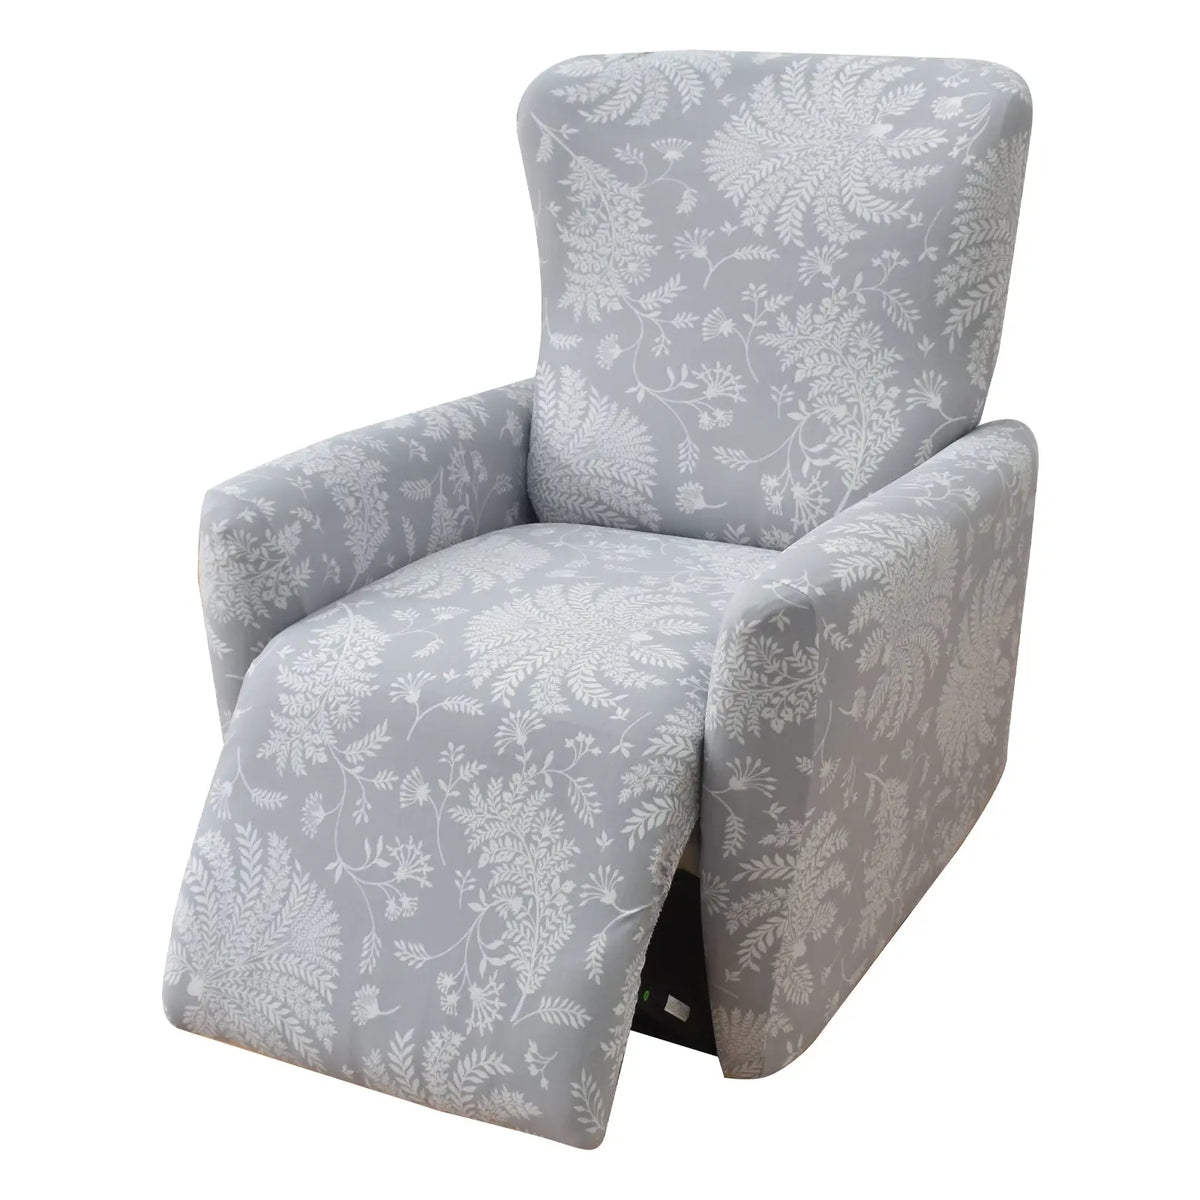 Classical Printing Recliner Cover Sofa Cover Including Include 1 Backrest Cover, 1 Seat Cover, 2 Armrest Cover Crfatop %sku%